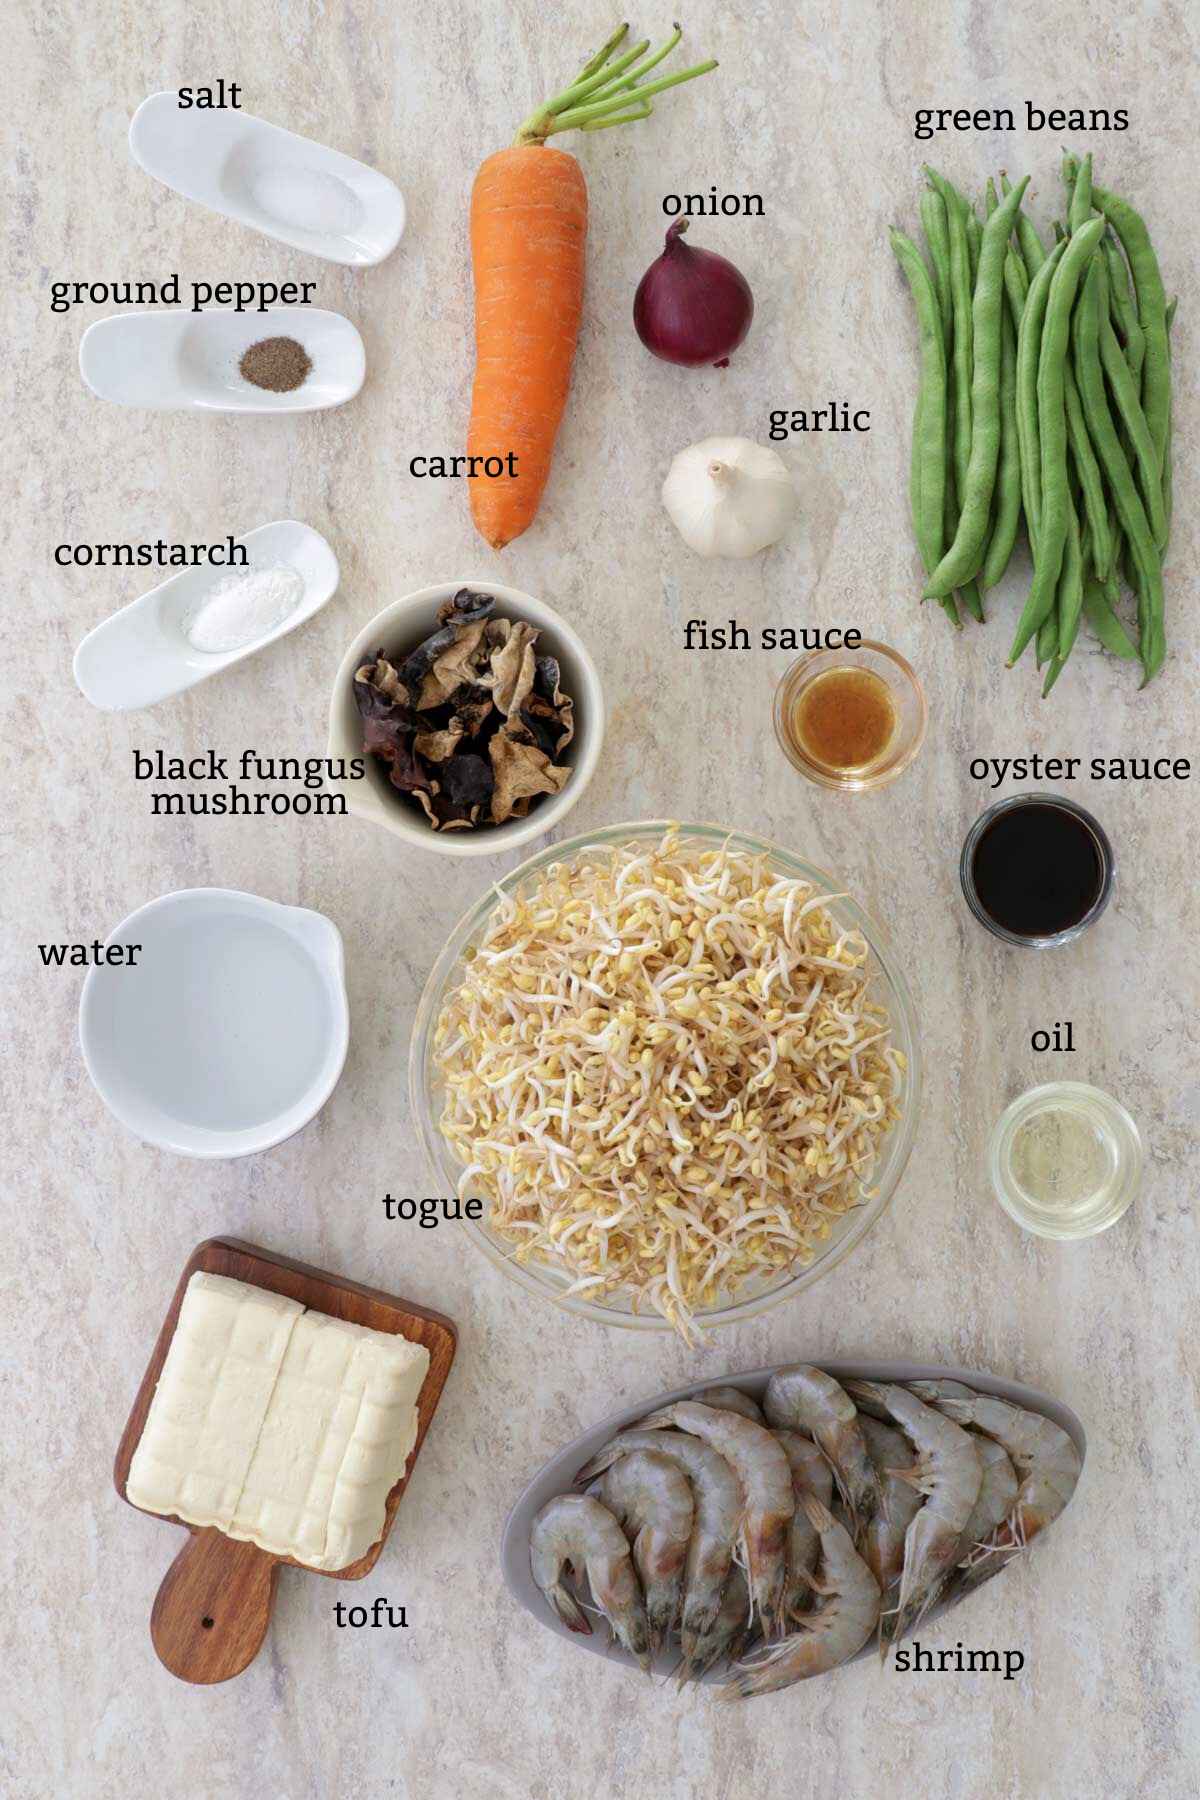 Ingredients for ginisang togue.